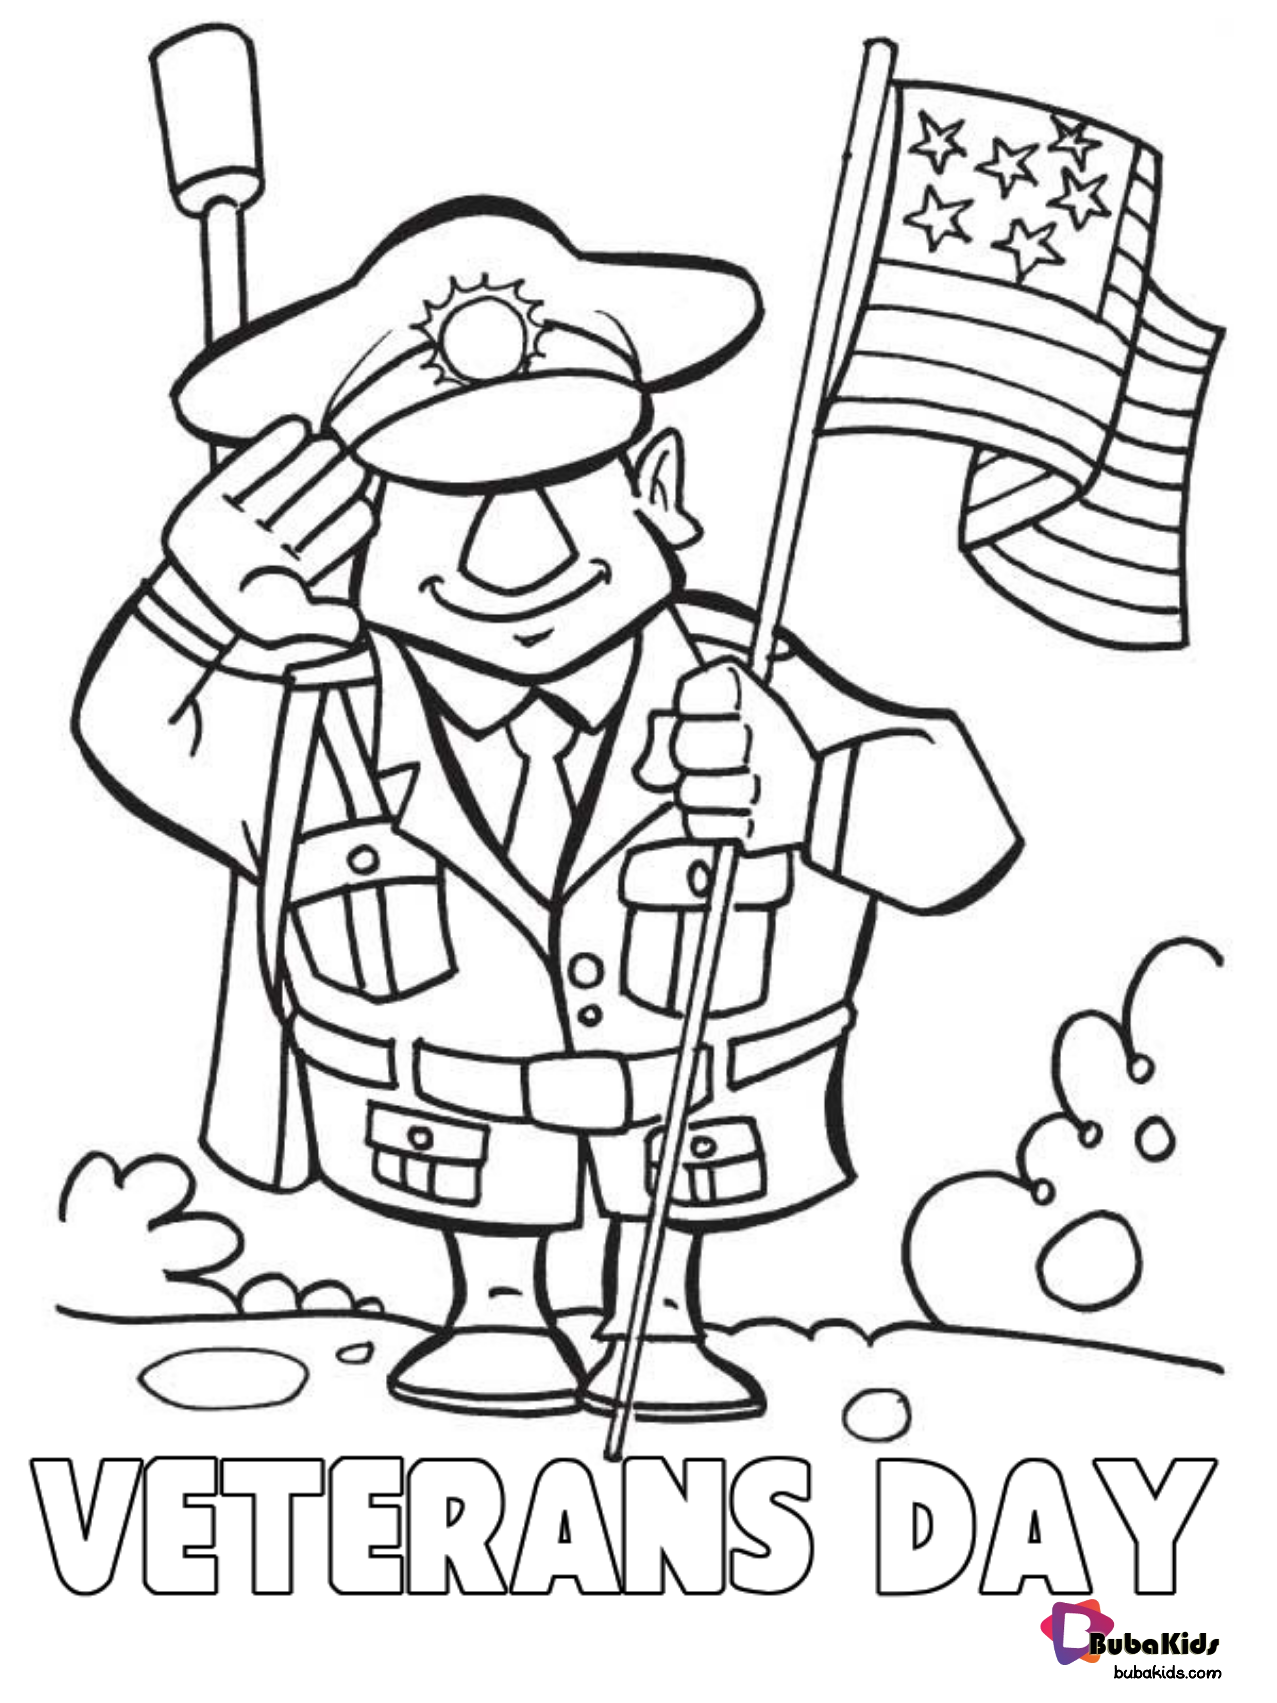 Veterans Day printable coloring pages. Wallpaper